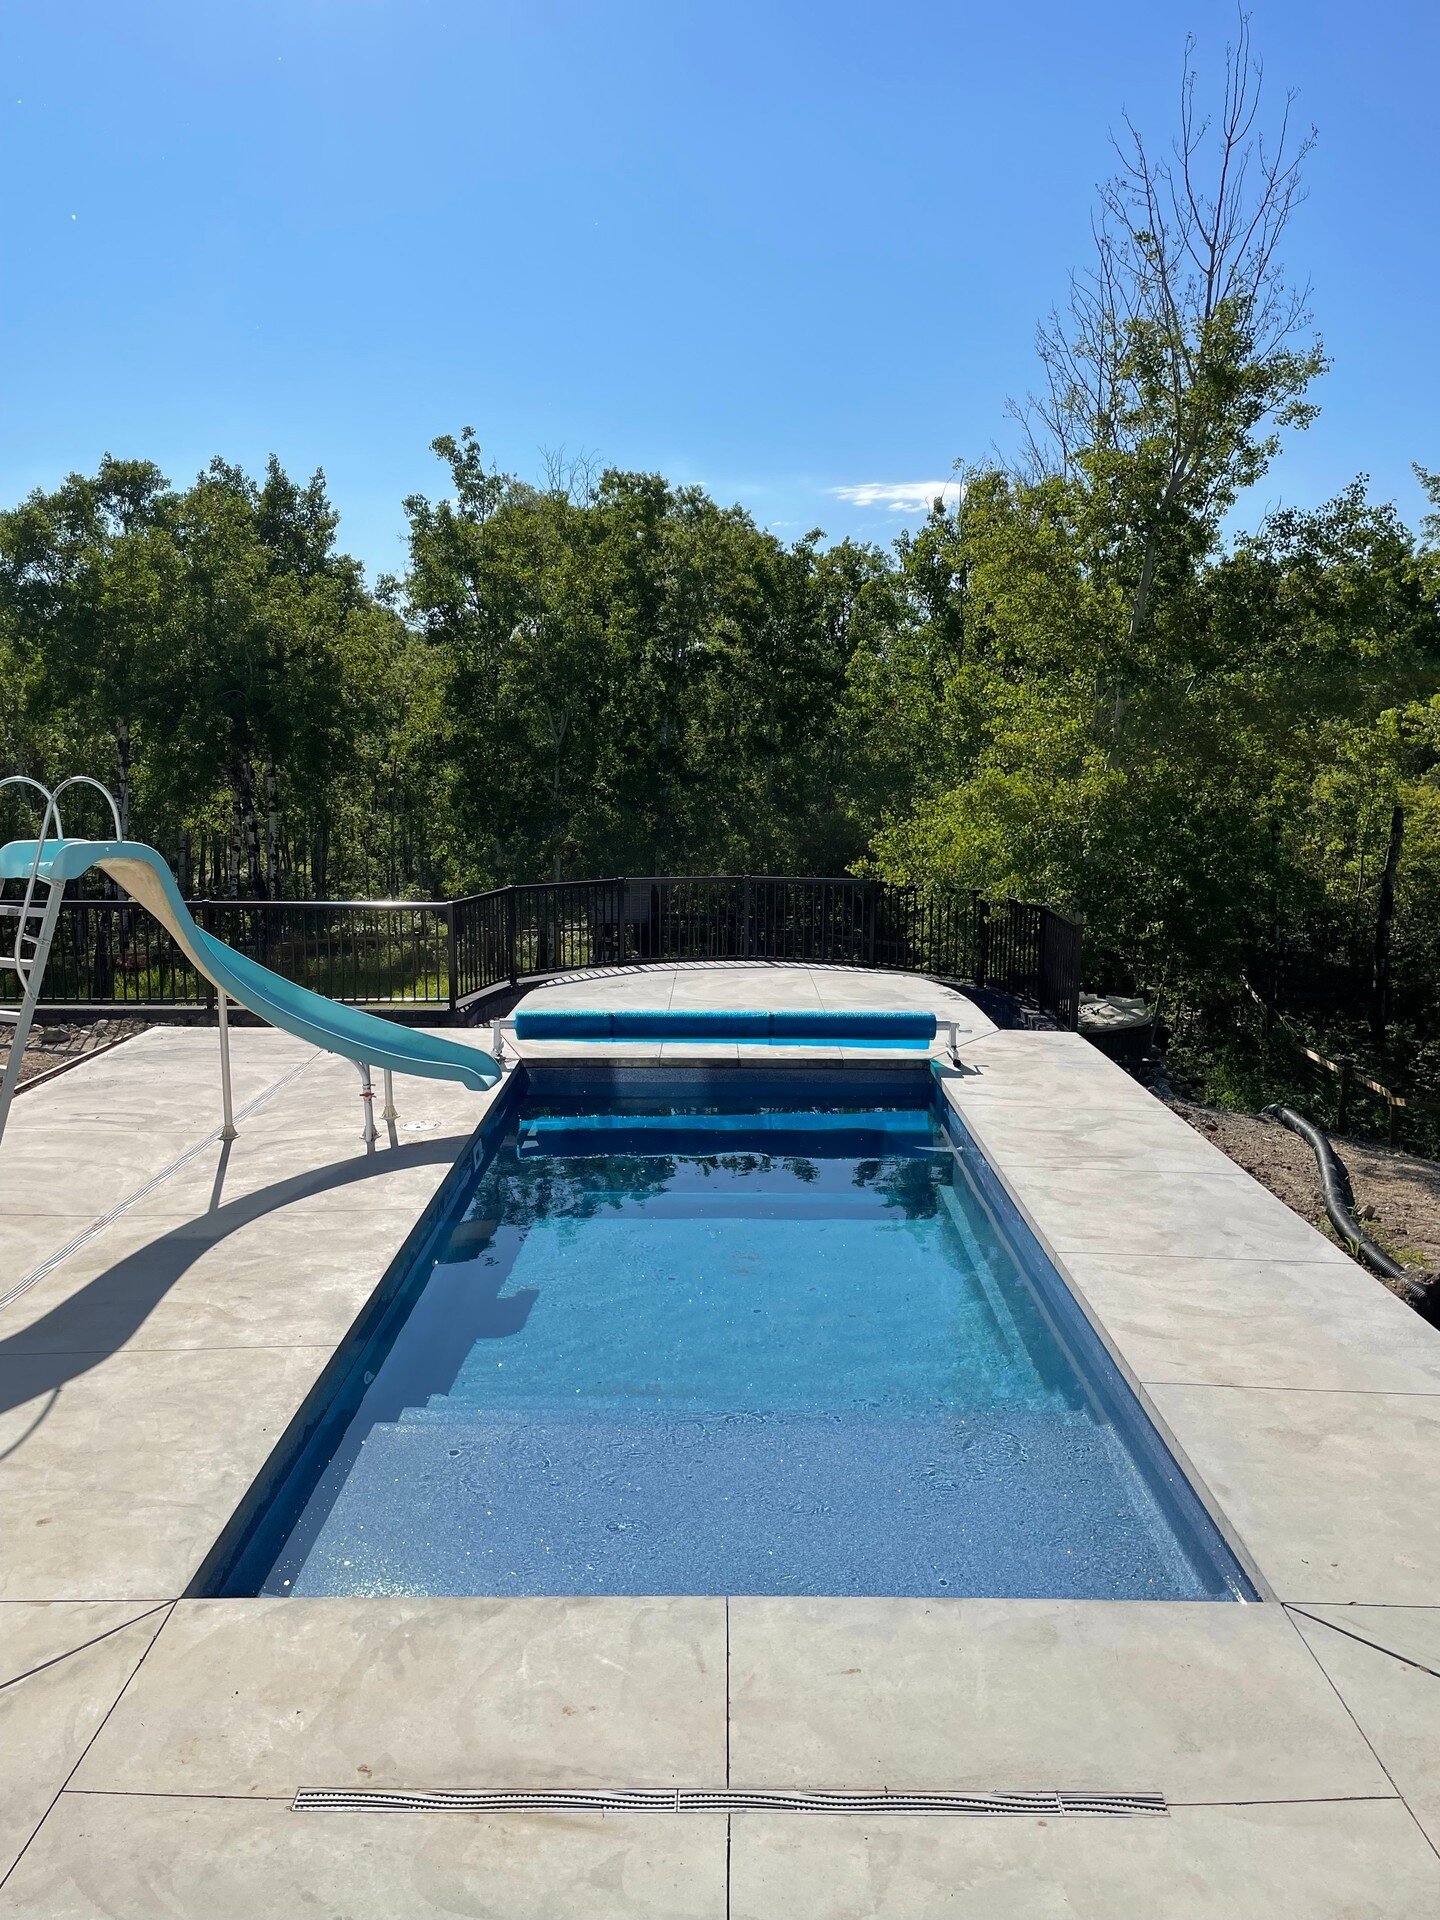 Which way would you enter: a cannonball? Hit the waterslide? A casual stroll down the steps? 🏊&zwj;♂️
.
.
.
#KeystoneOutdoorLiving #Saskatoon #LandscapeDesign #SwimmingPools #Patios #Decks #OutdoorLiving #Driveways #SaskatoonBackyards